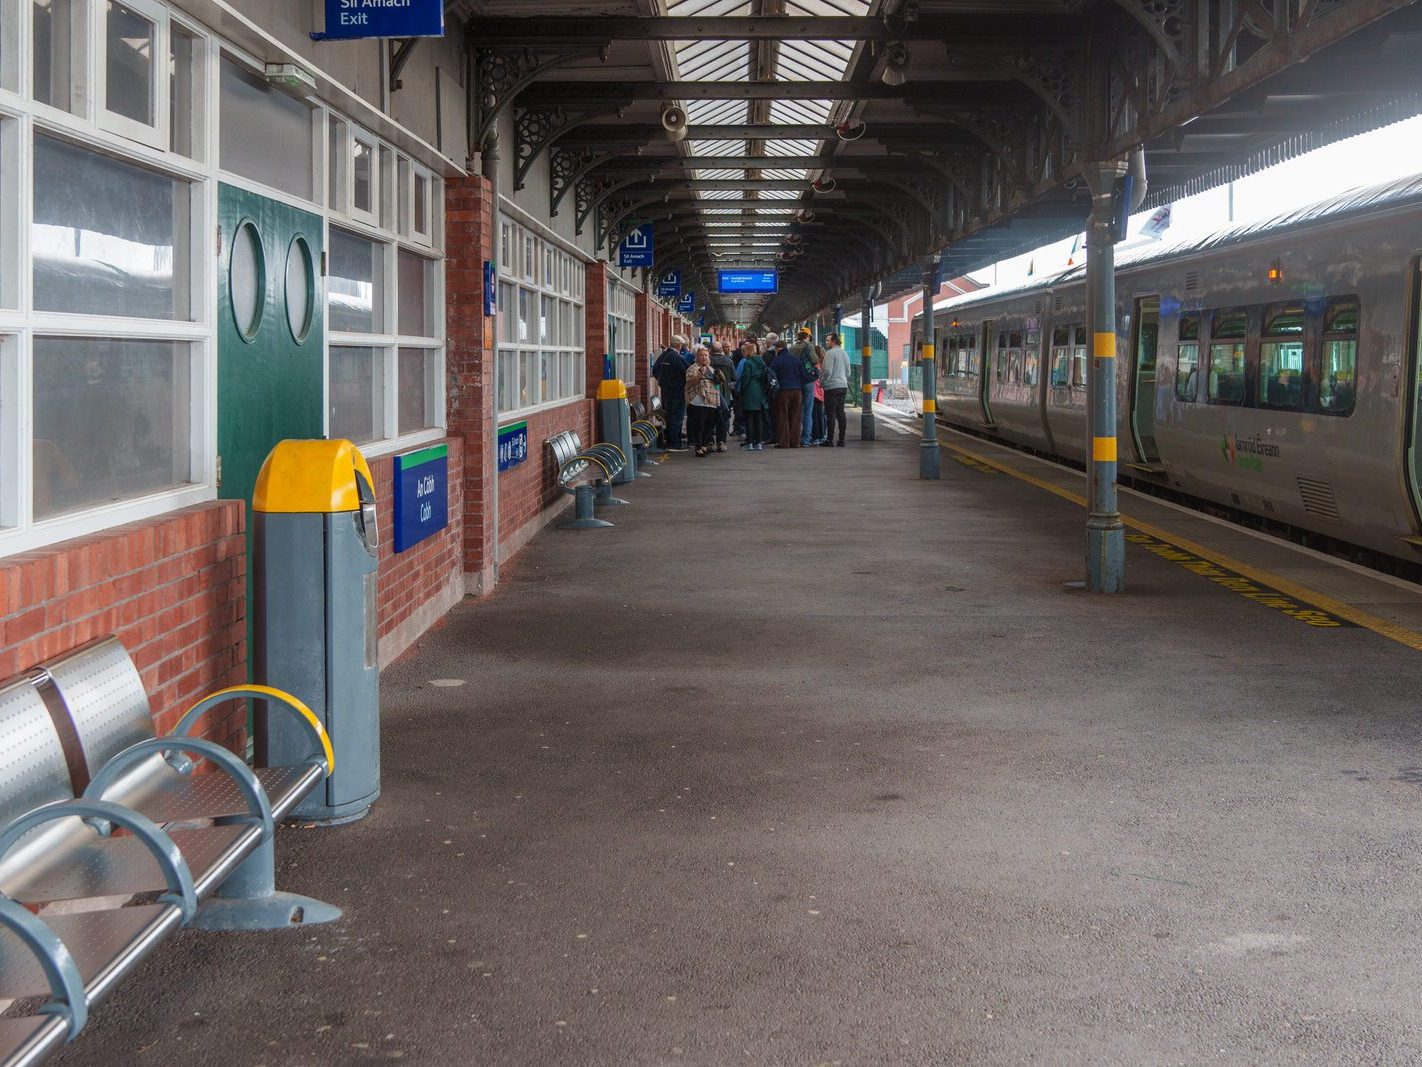 COBH RAILWAY STATION [COBH IS PRONOUNCED AS COVE] 010